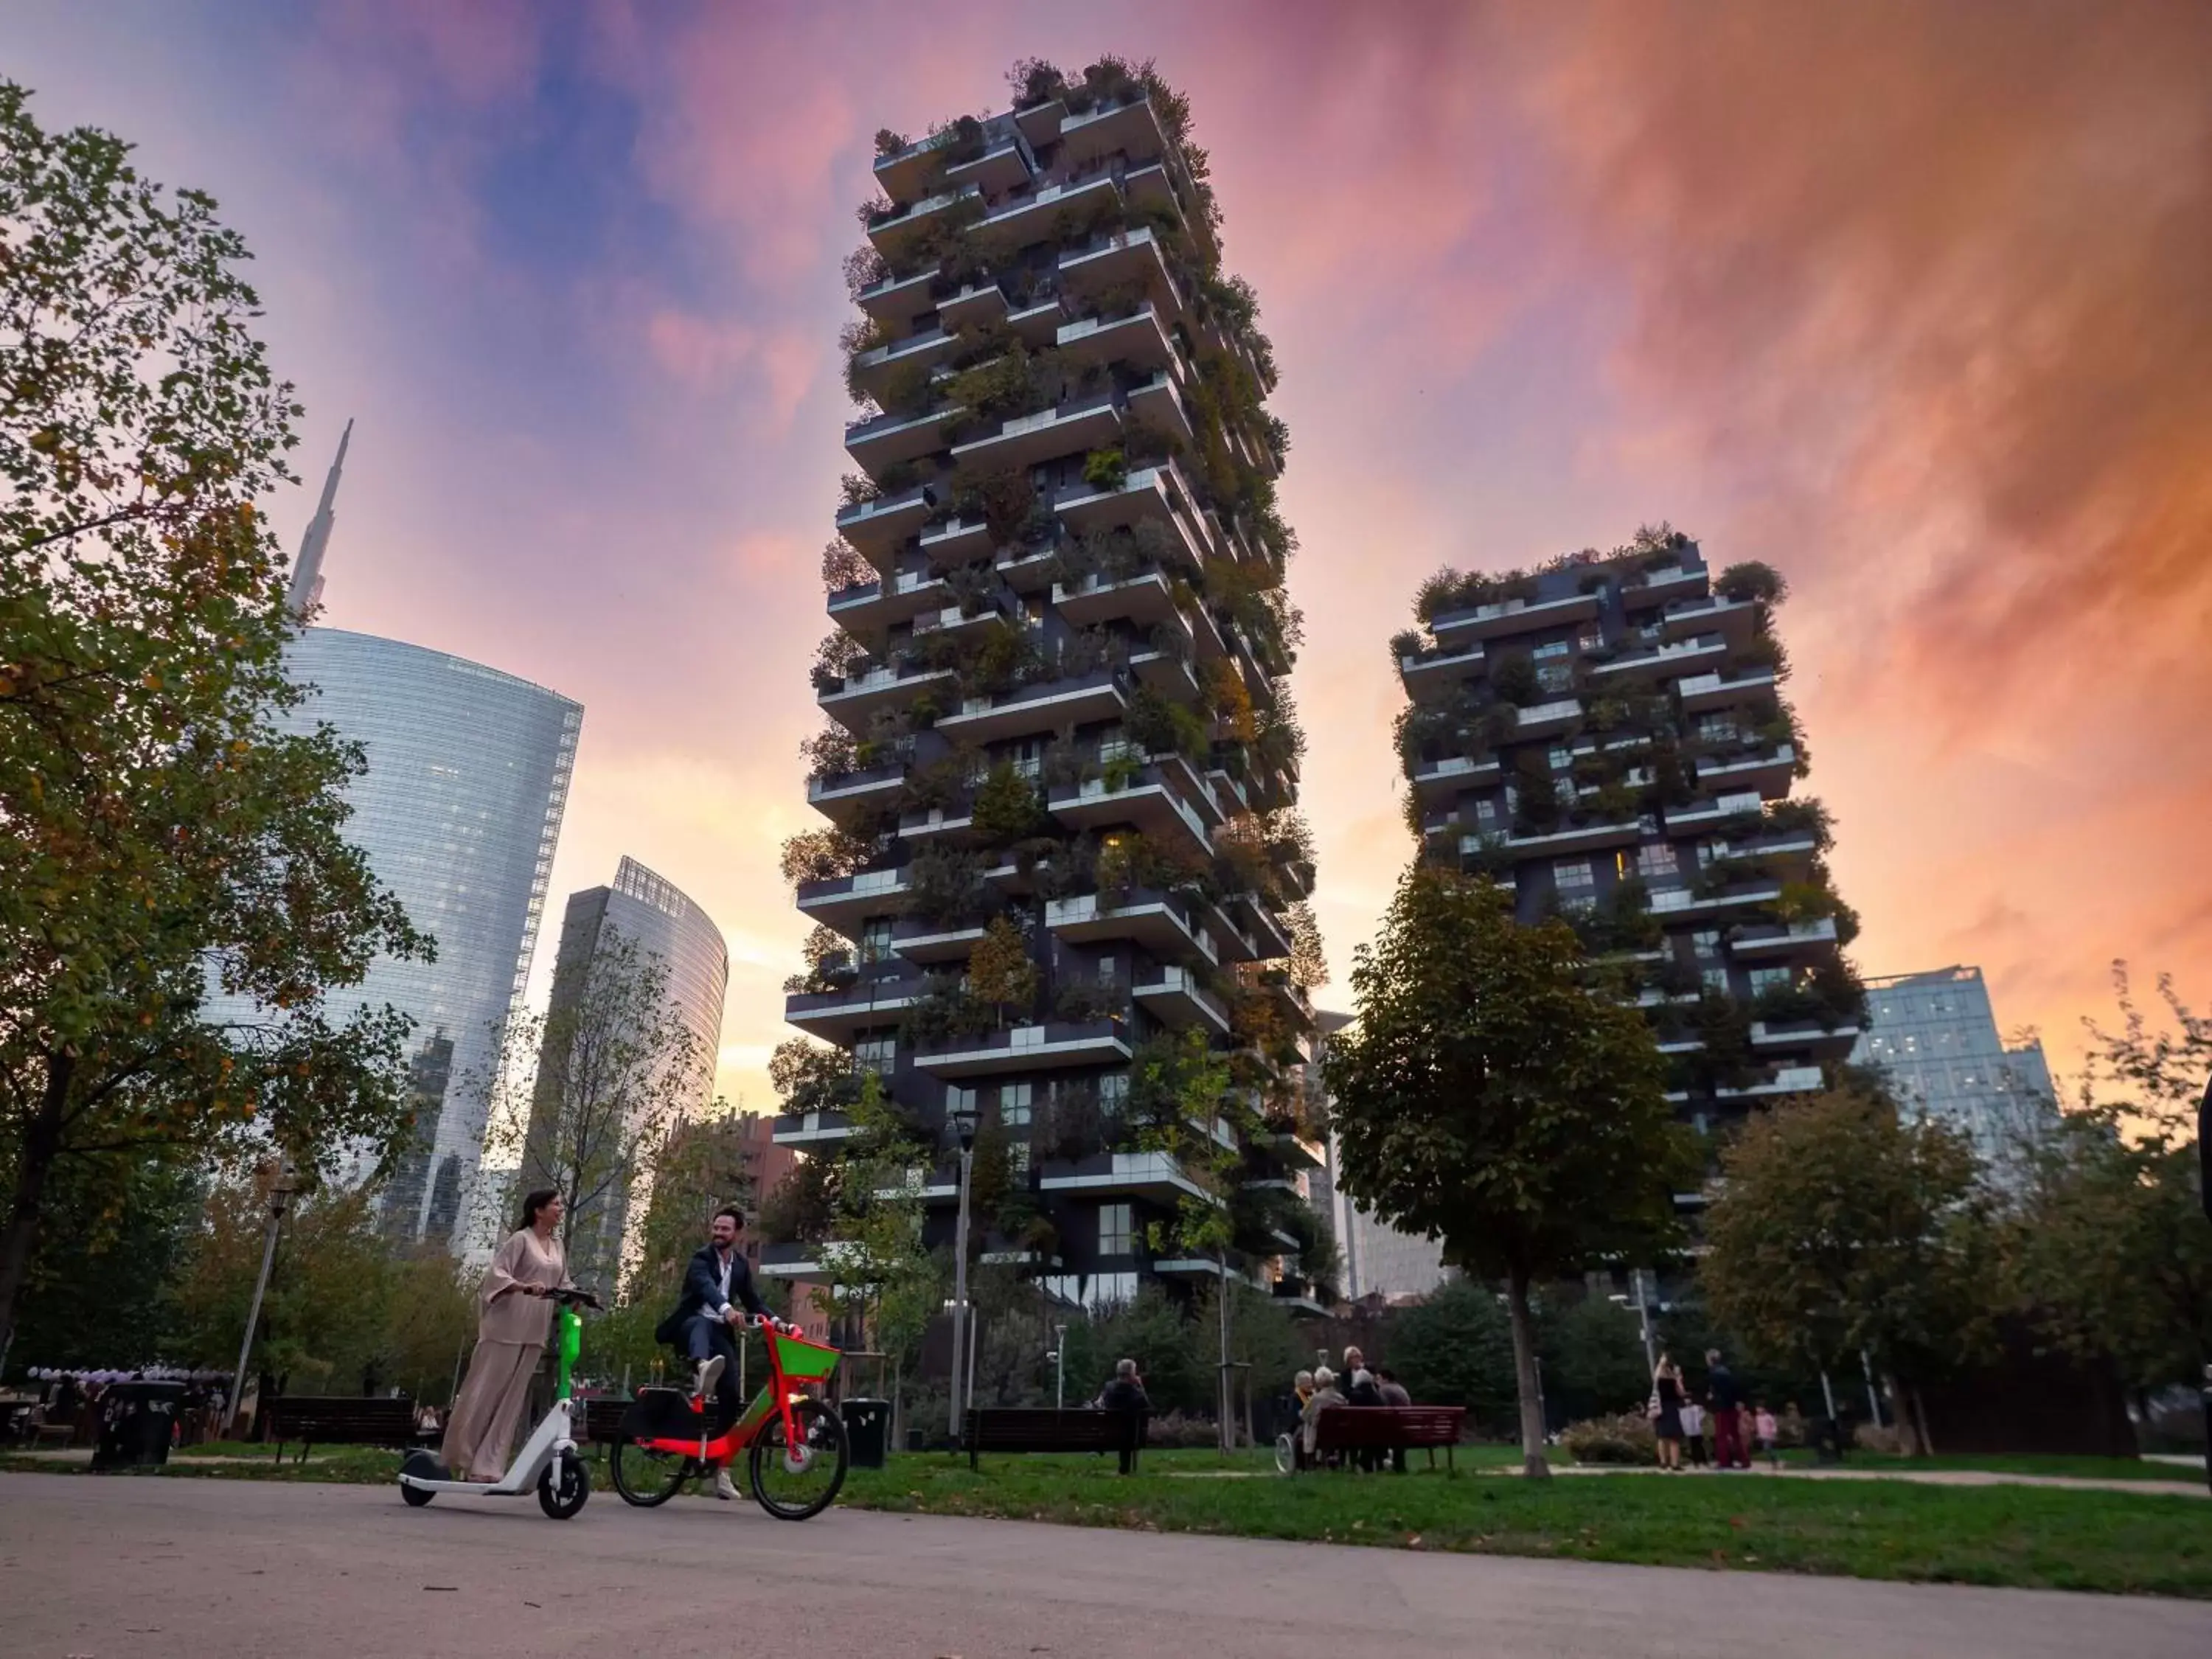 Cycling, Property Building in Hyatt Centric Milan Centrale